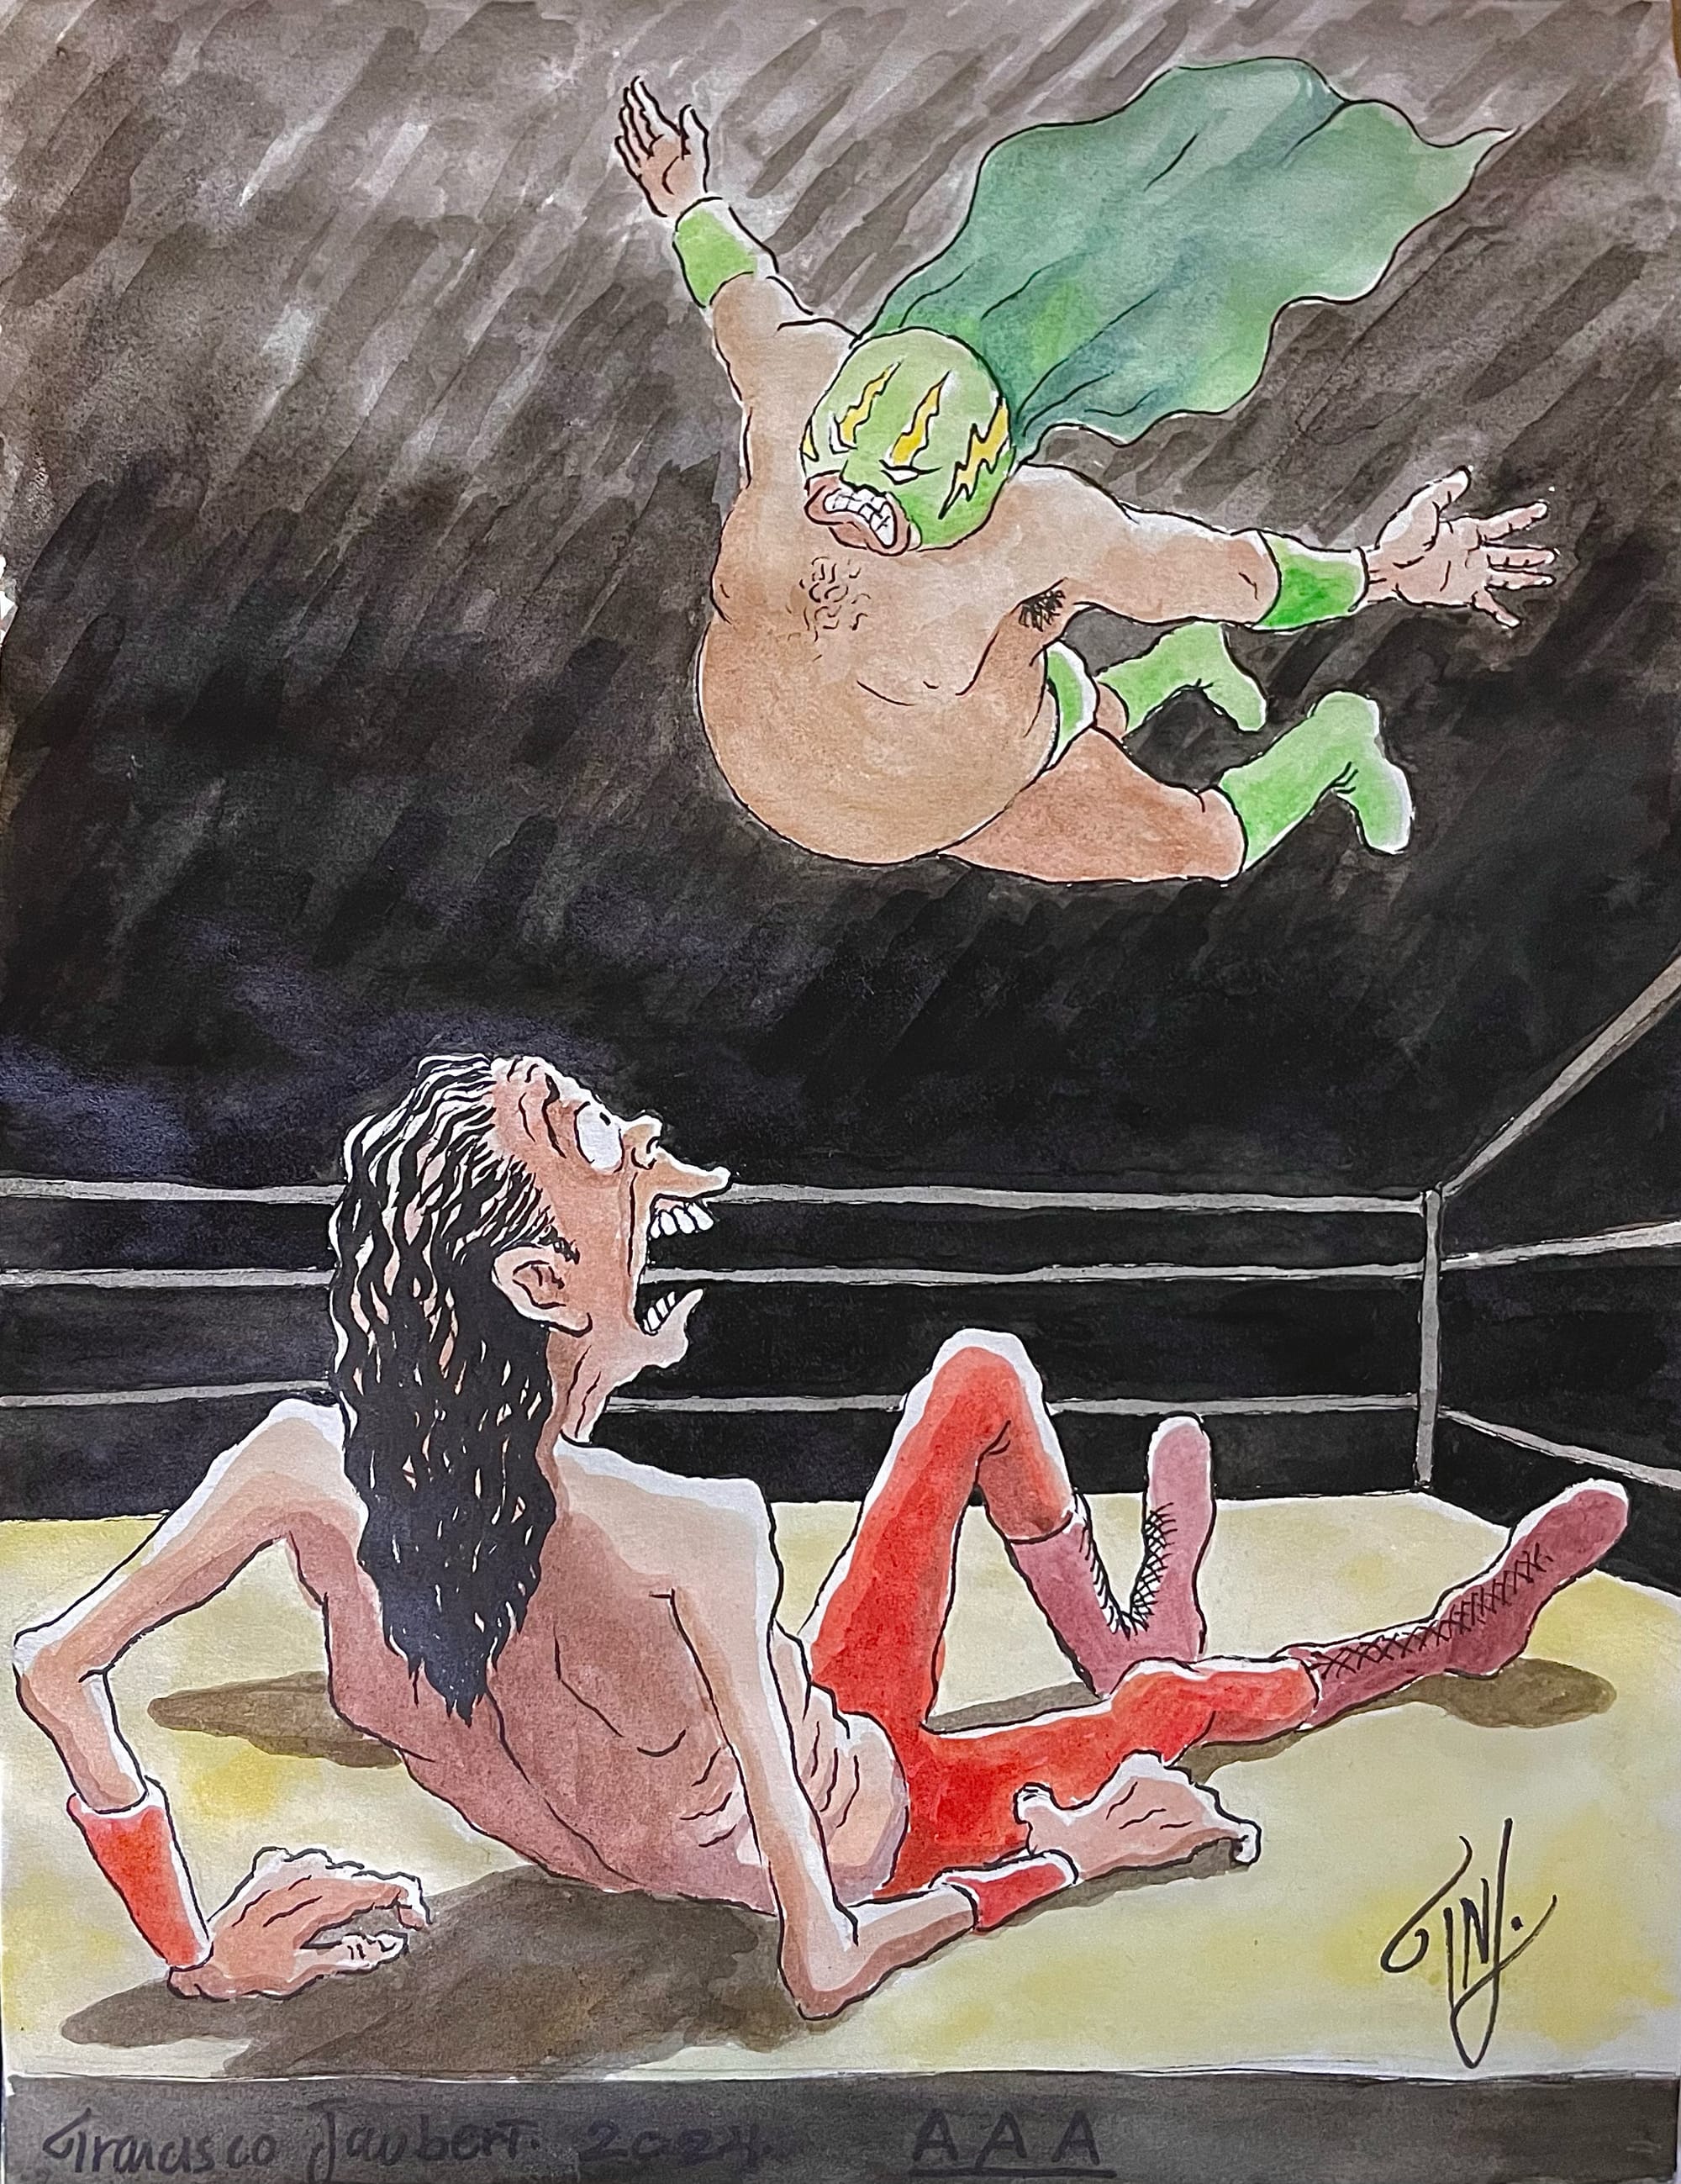 Cartoon of a wrestler in a luchador mask in the air about to land on another wrestler inside the ring